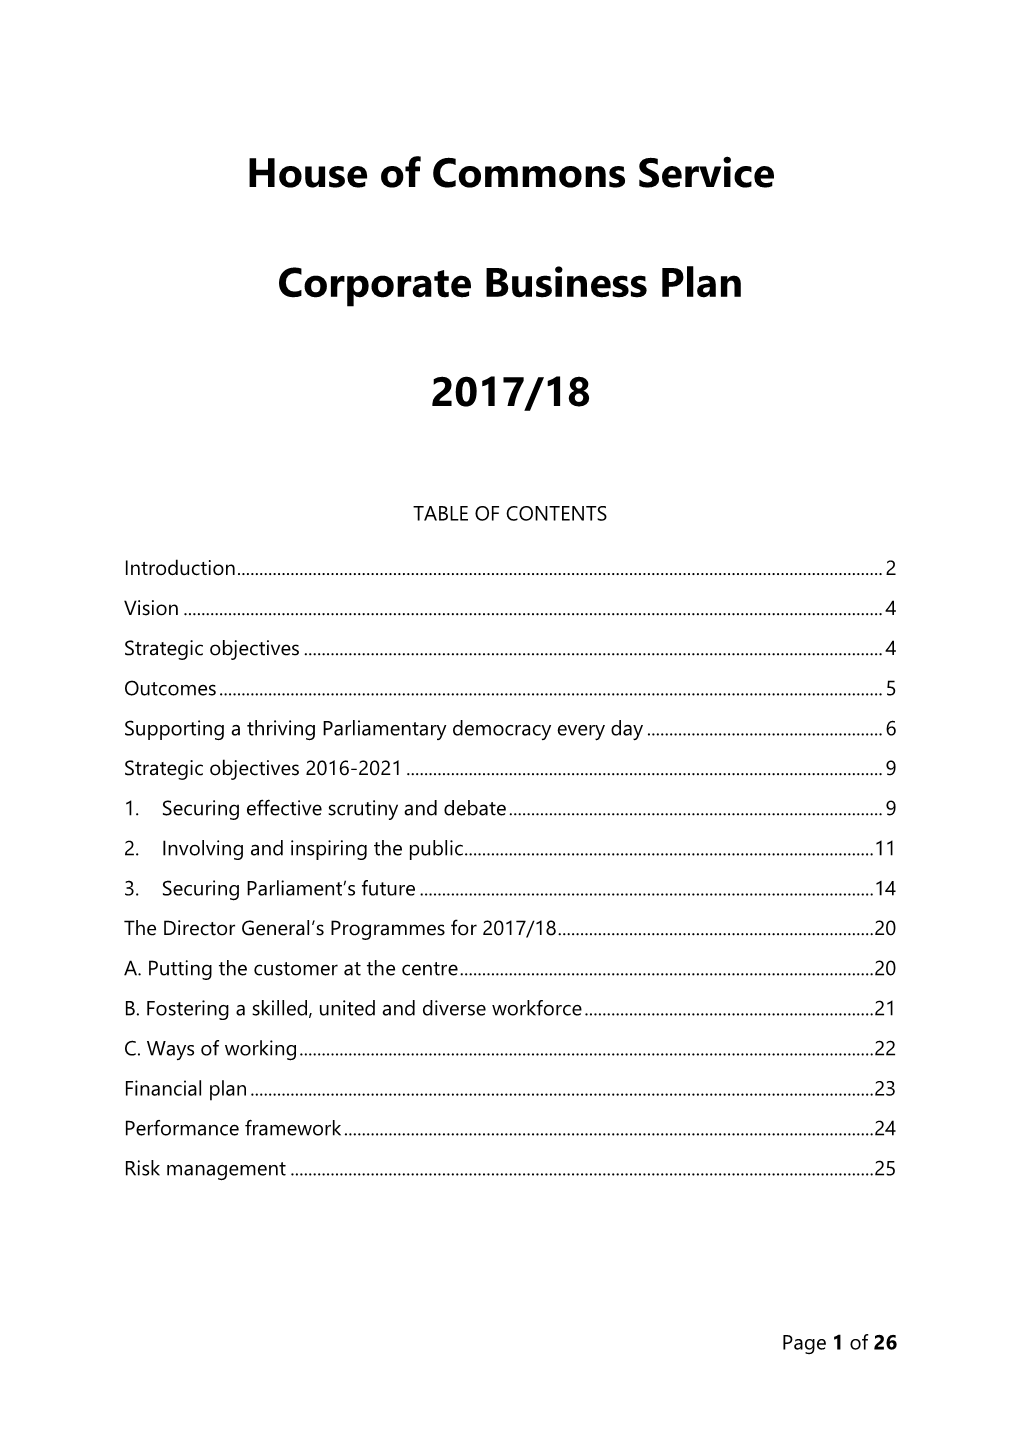 House of Commons Service Corporate Business Plan 2017/18